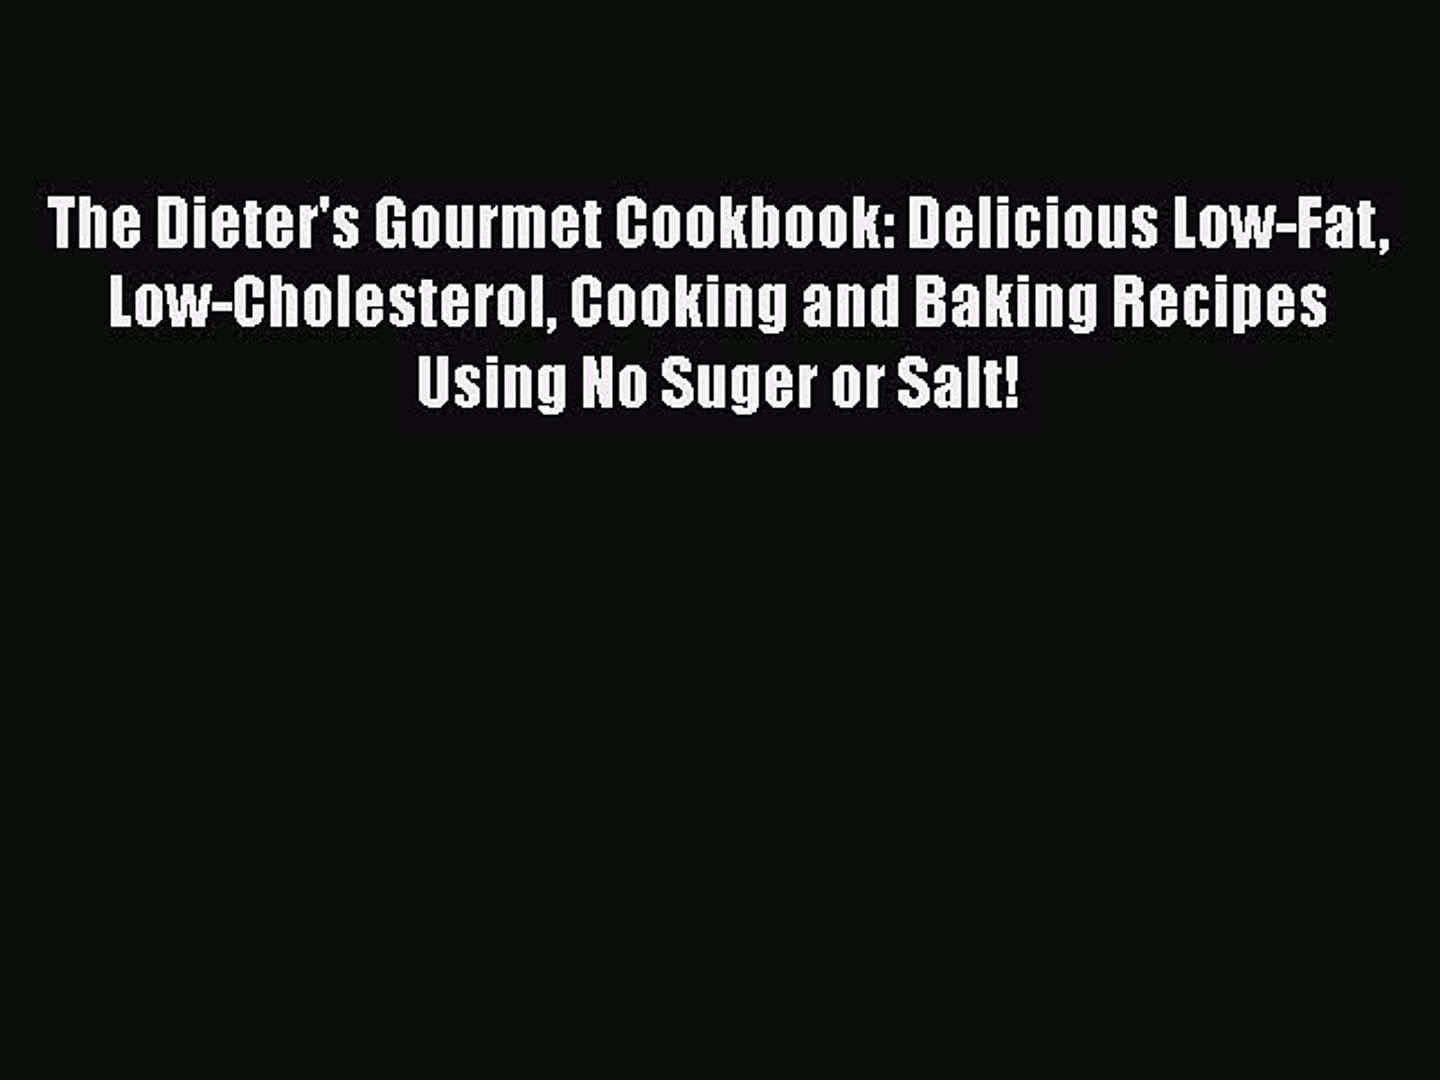 Read The Dieter's Gourmet Cookbook: Delicious Low-Fat Low-Cholesterol Cooking and Baking Recipe